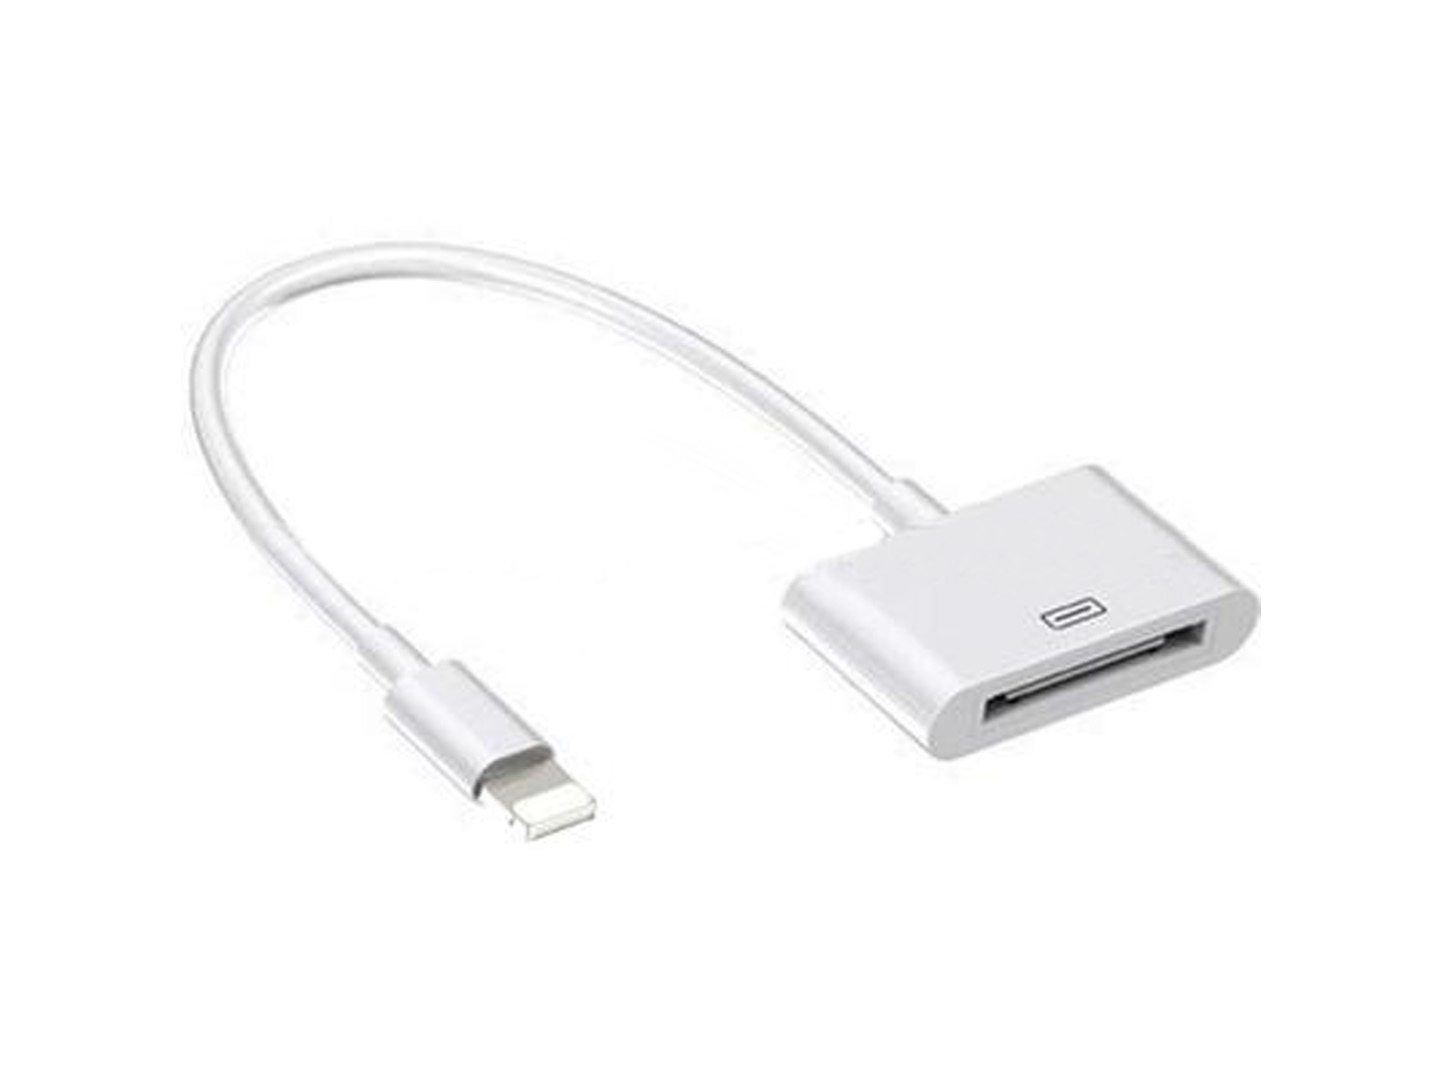 iPhone adapter cable